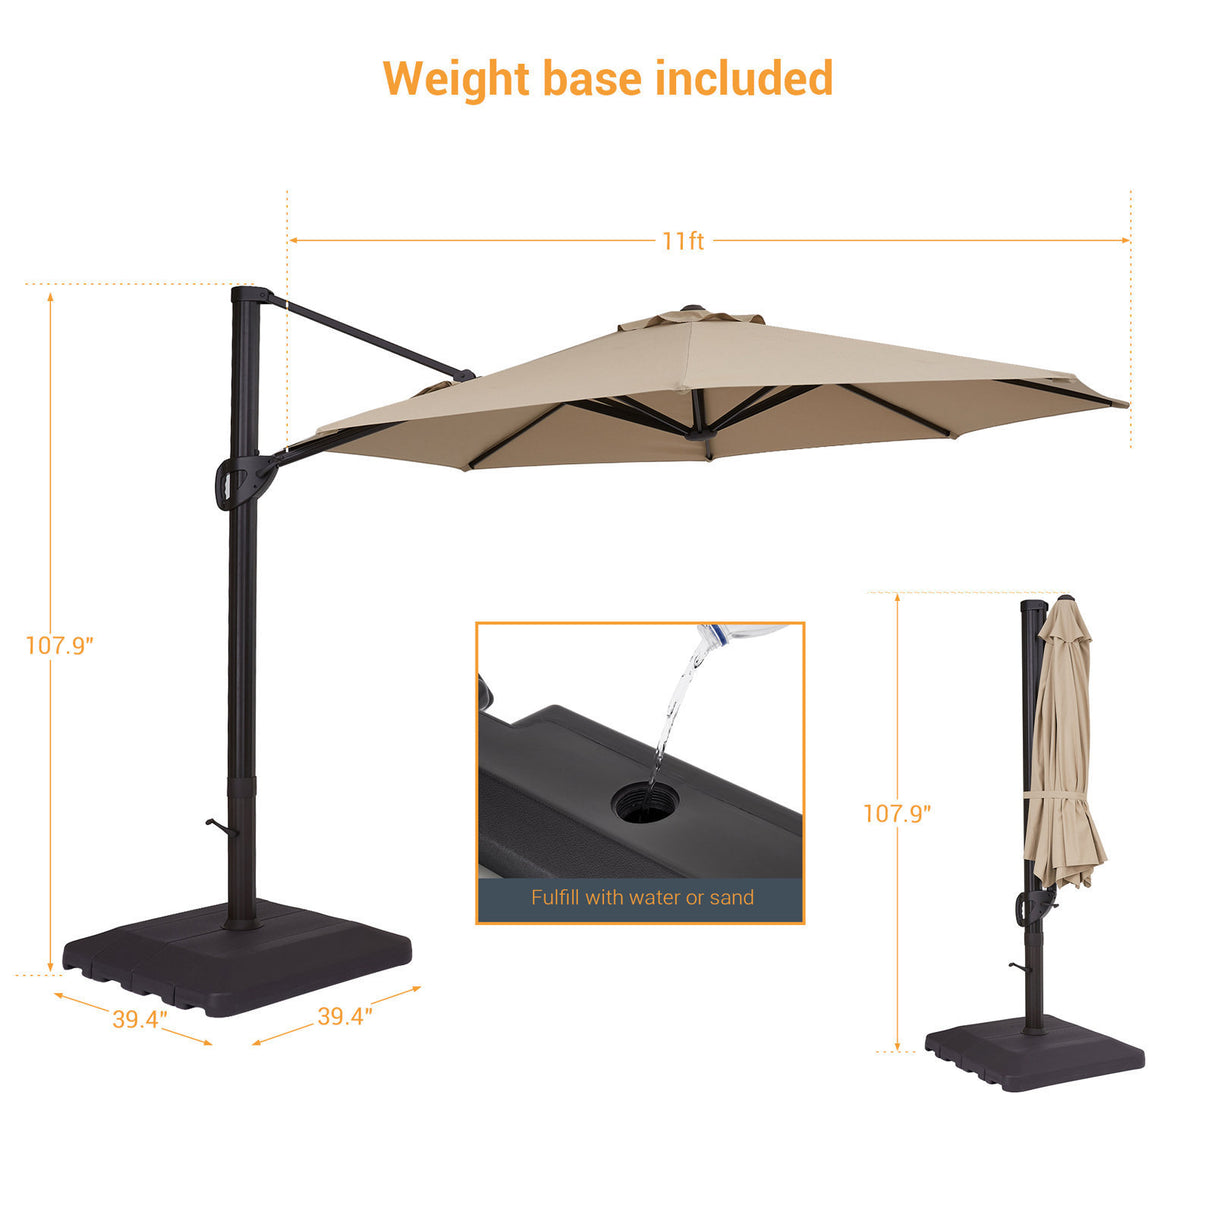 Patio Cantilever Umbrella with Weight Base for Deck, Pool and Backyard in Beige